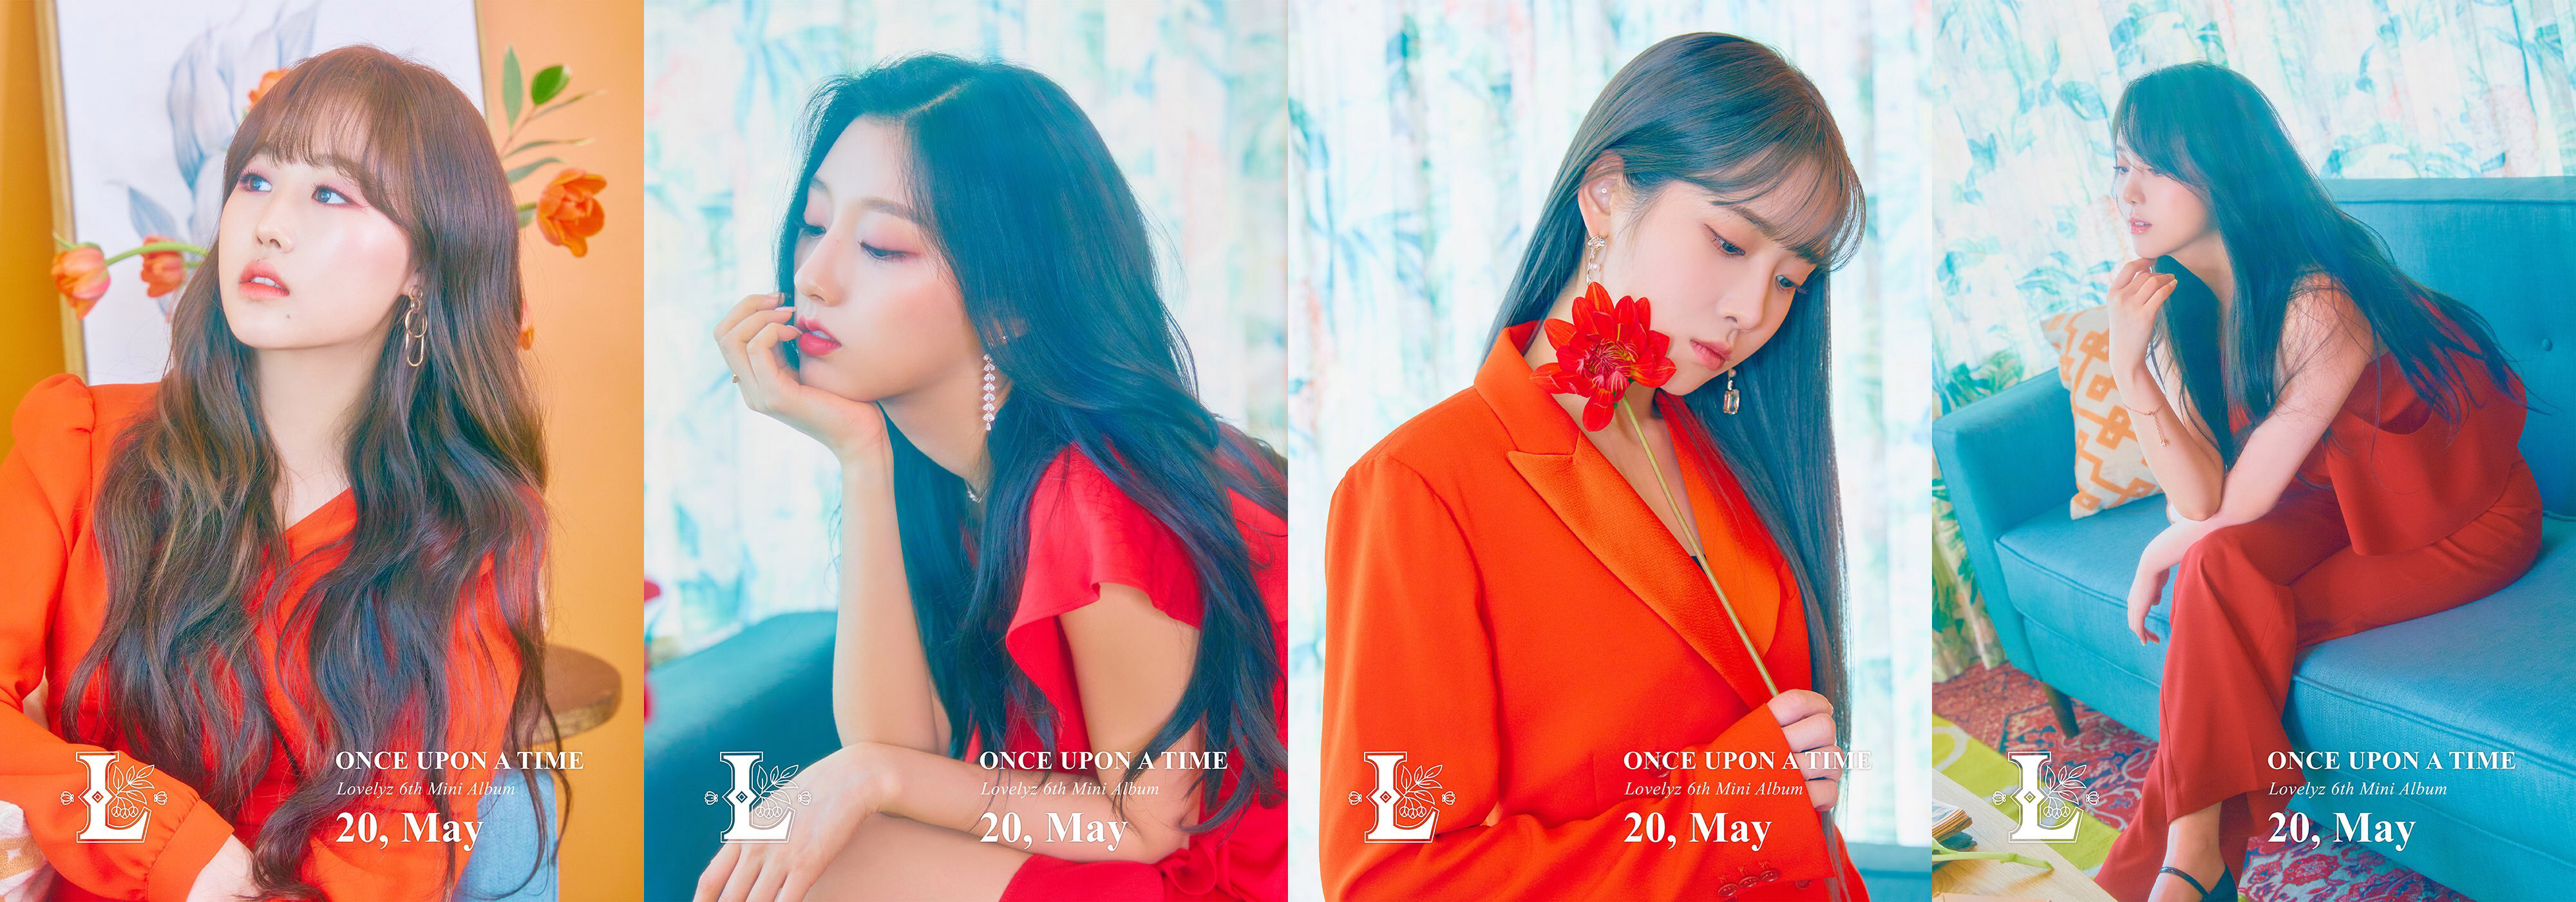 Lovelyz Babysoul Yein Jiae Kei Once Upon A Time Teaser